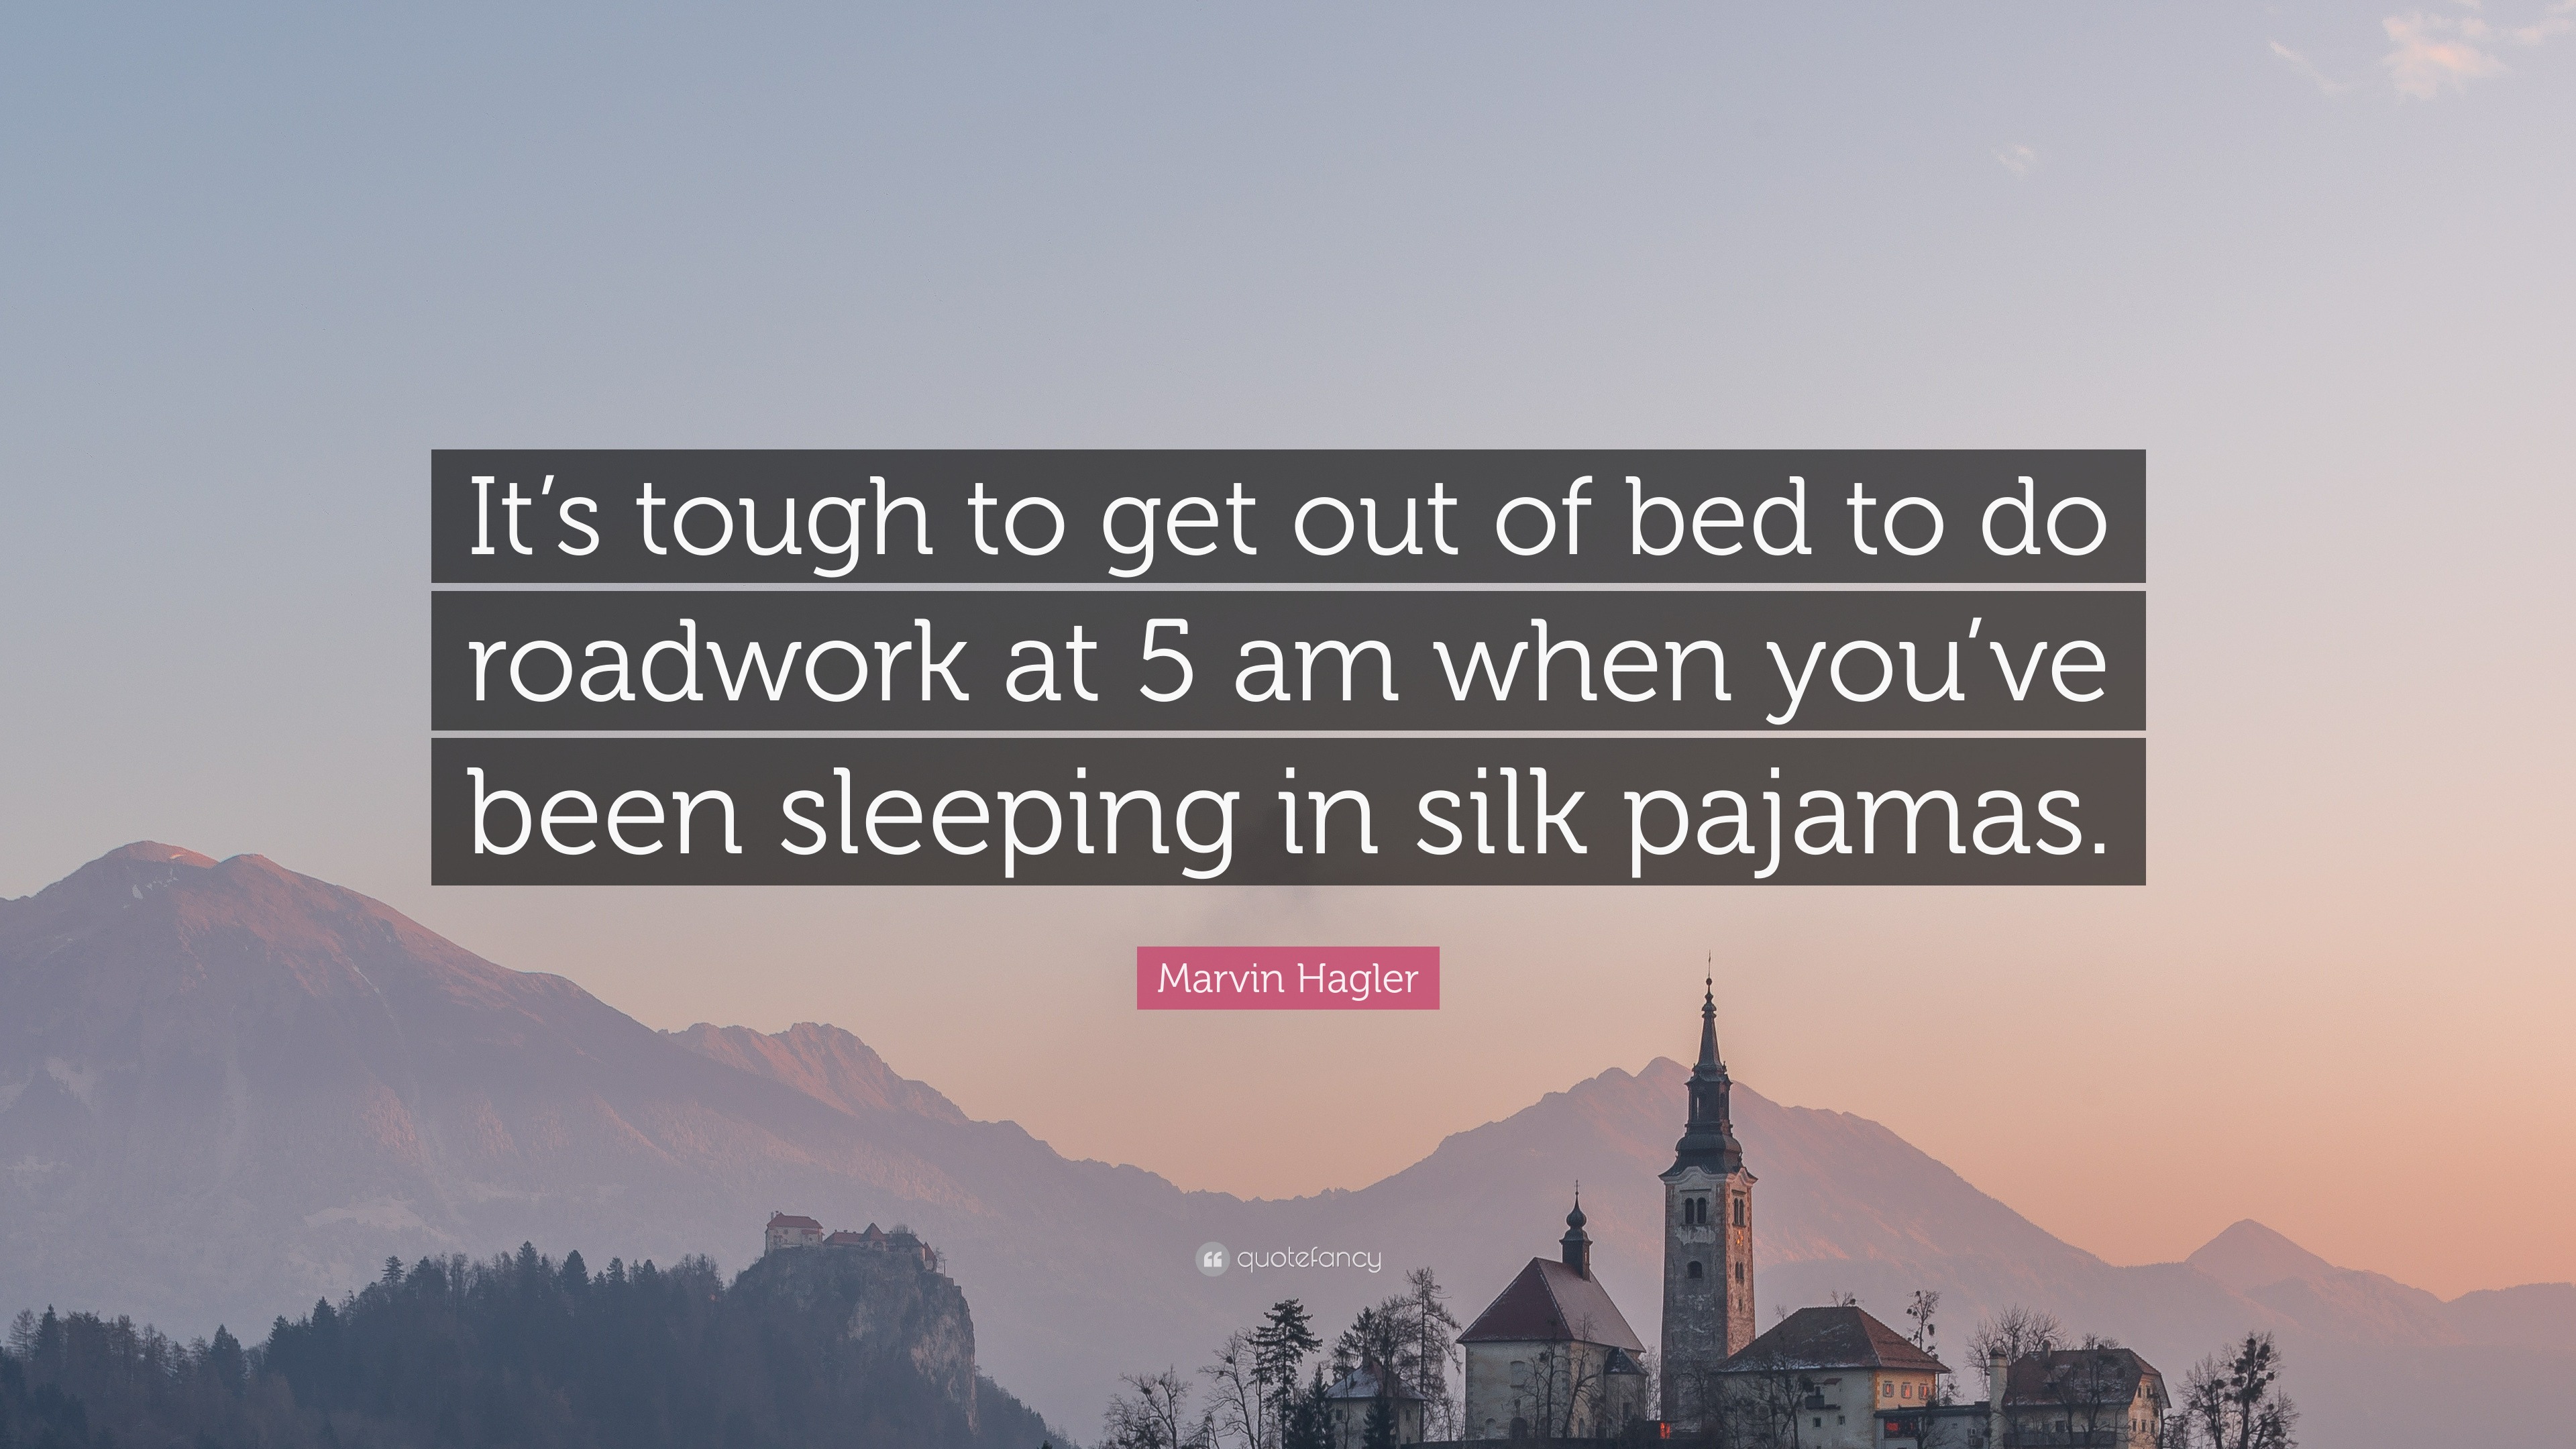 Marvin Hagler Quote: "It's tough to get out of bed to do ...